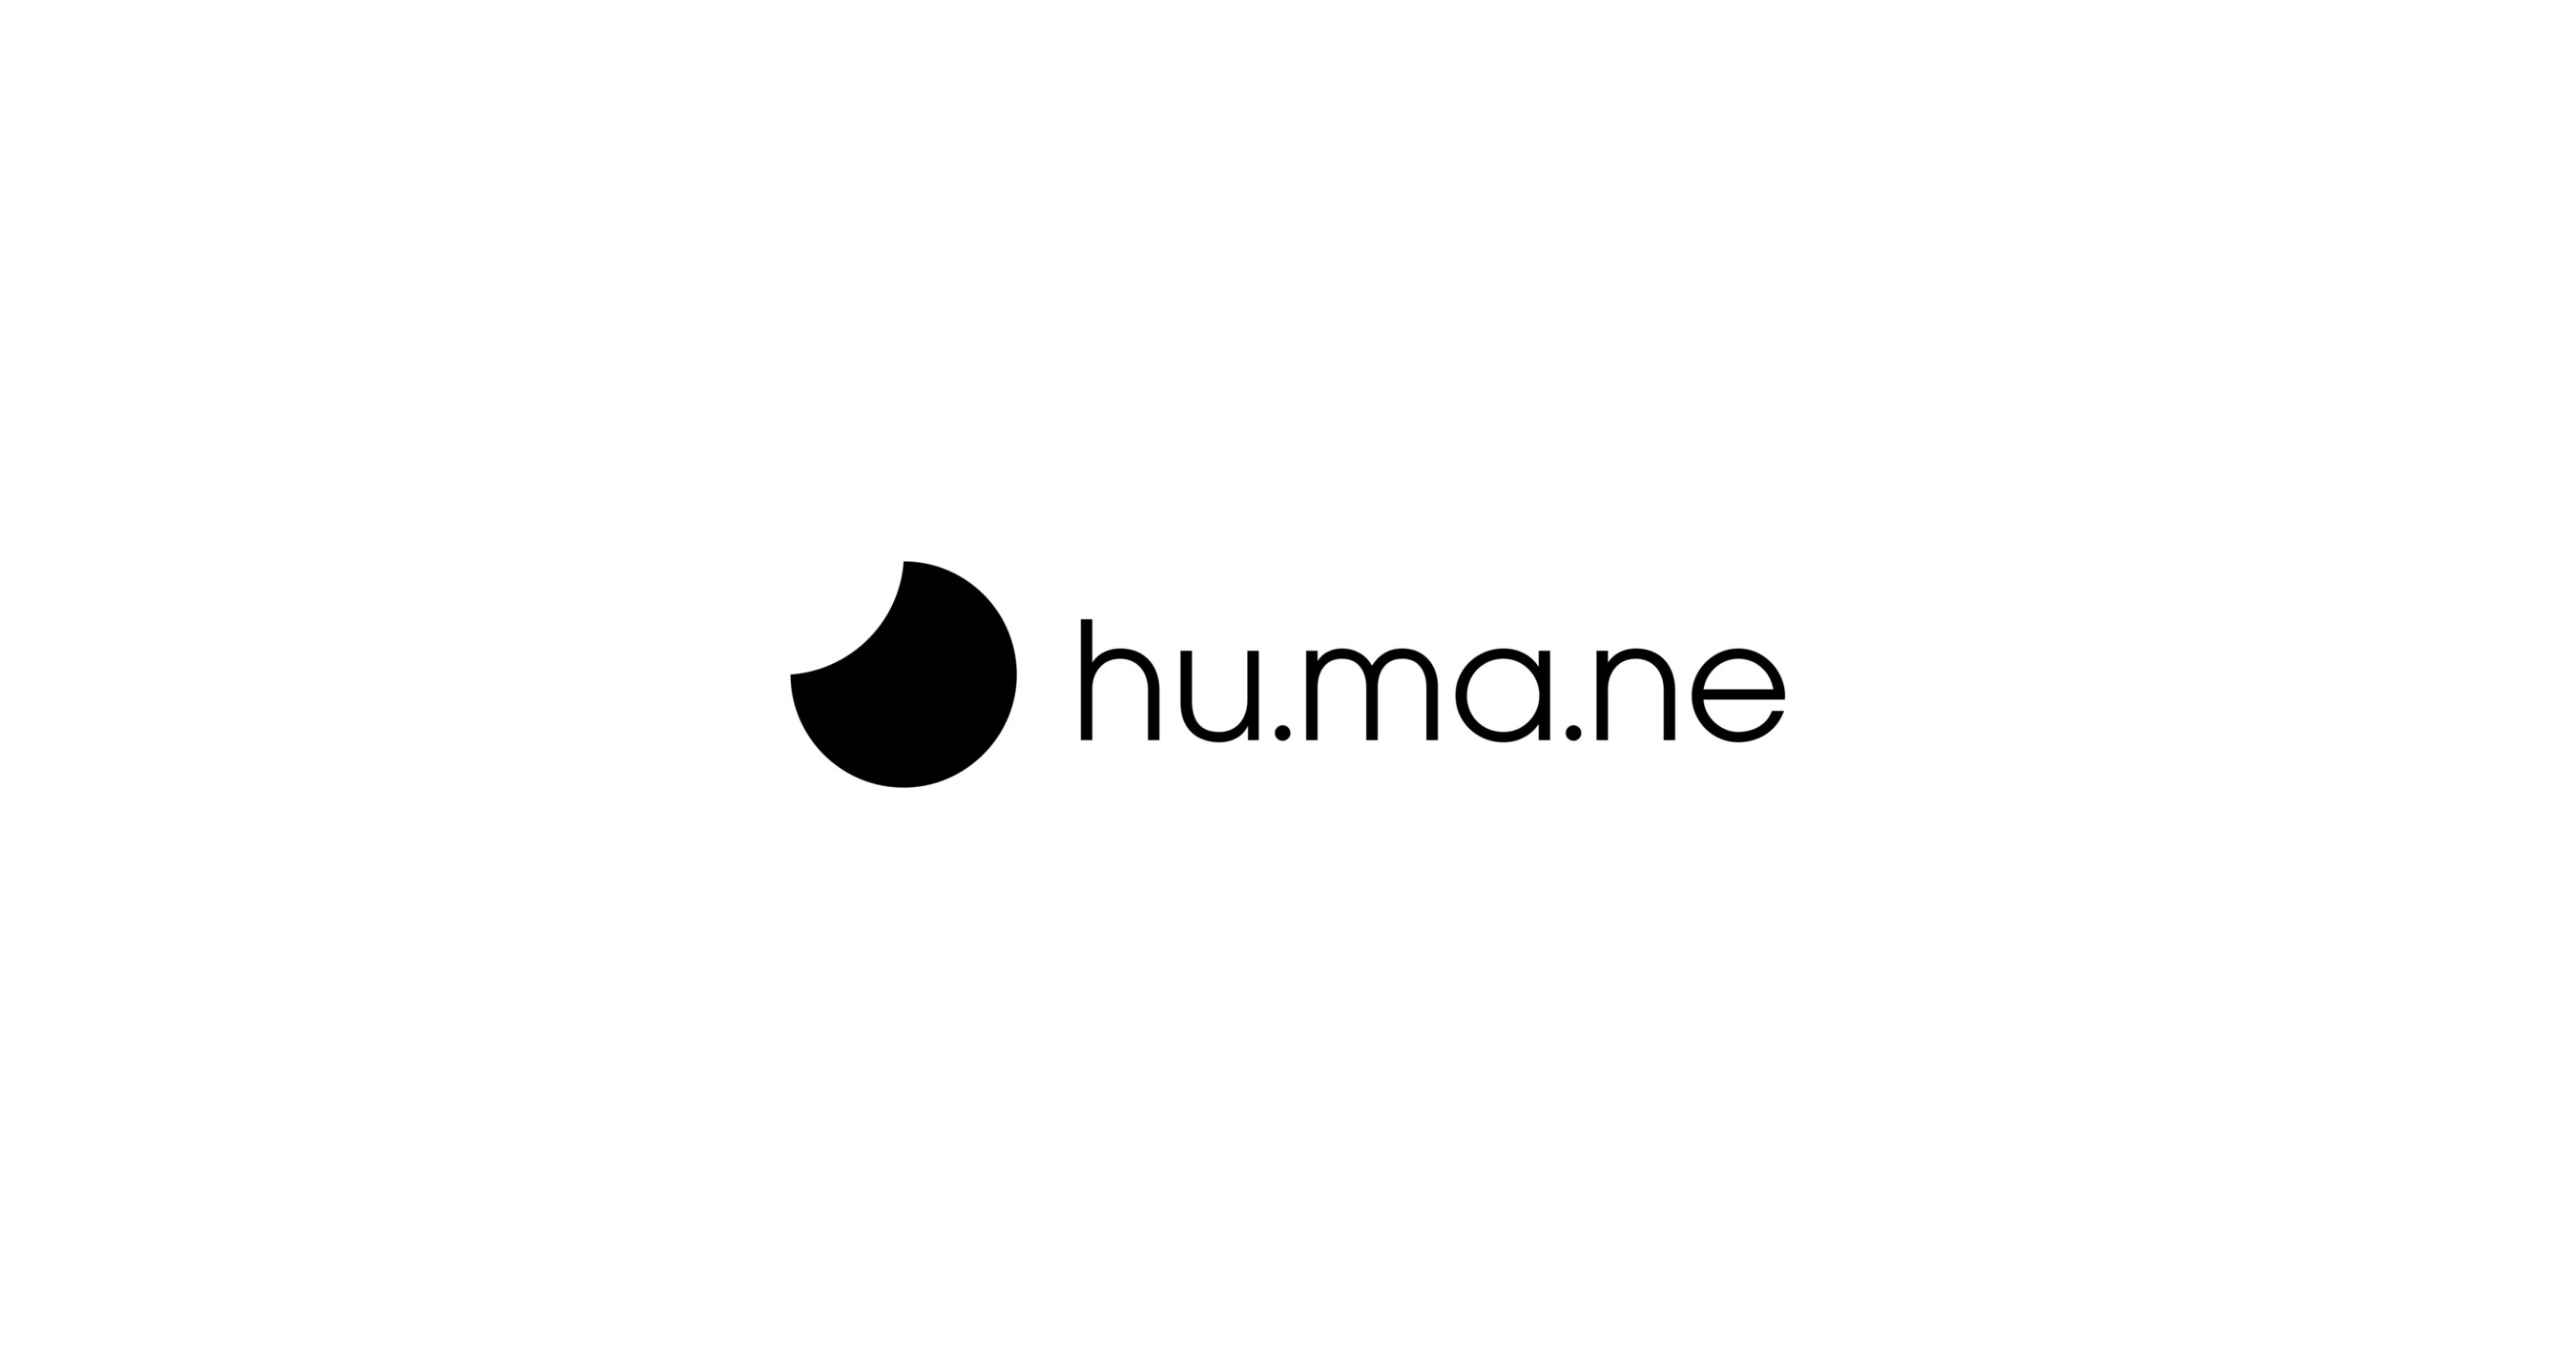 Humane Ai Pin Now Available for Purchase